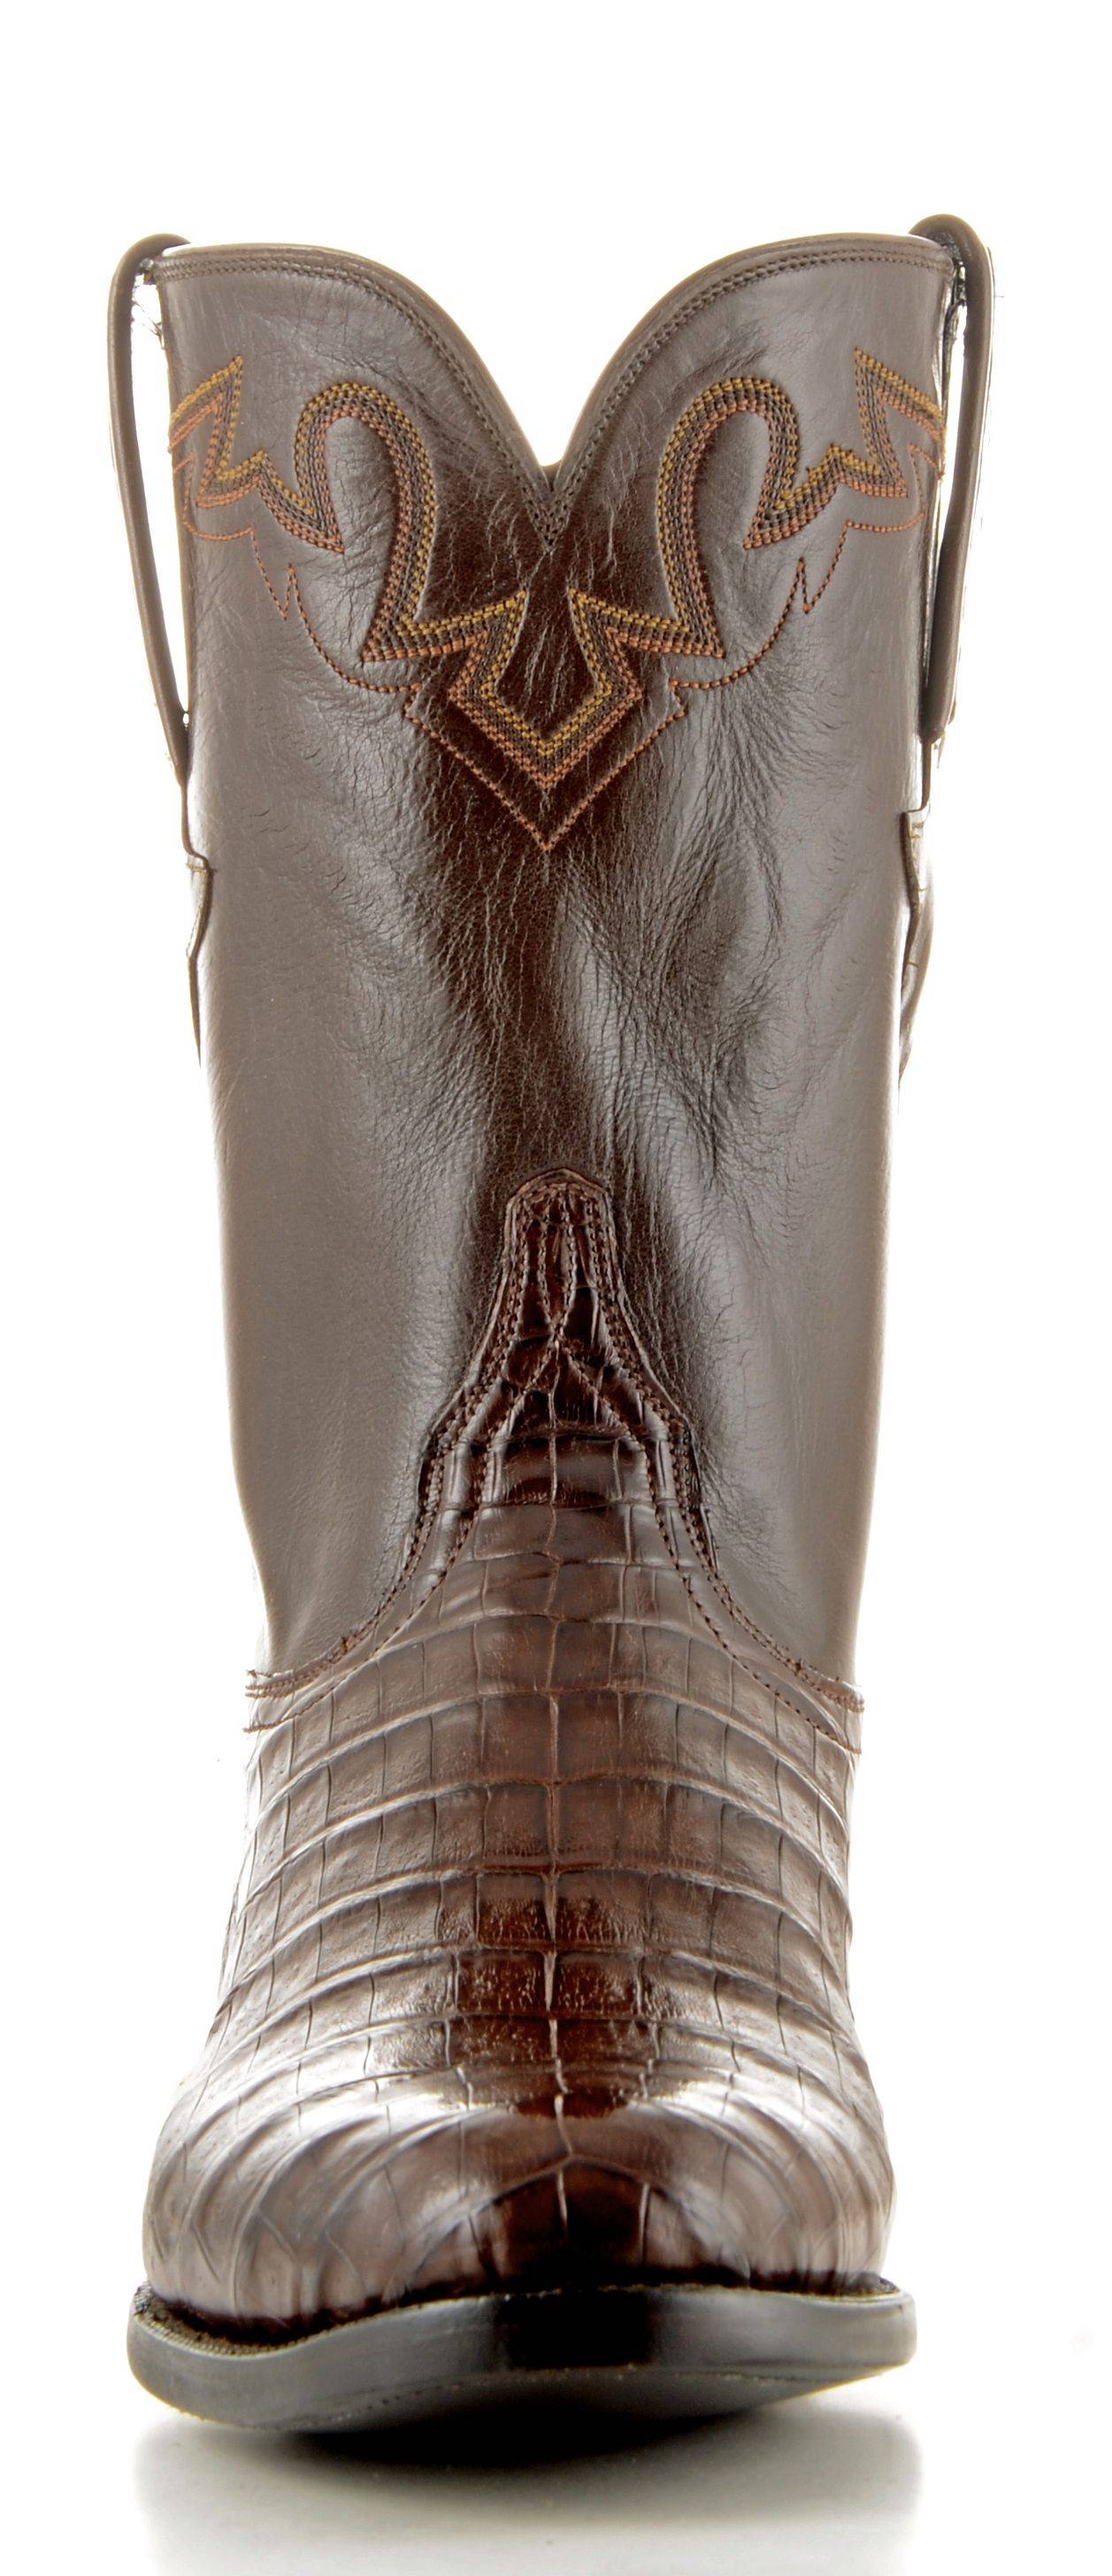 lucchese caiman roper boots